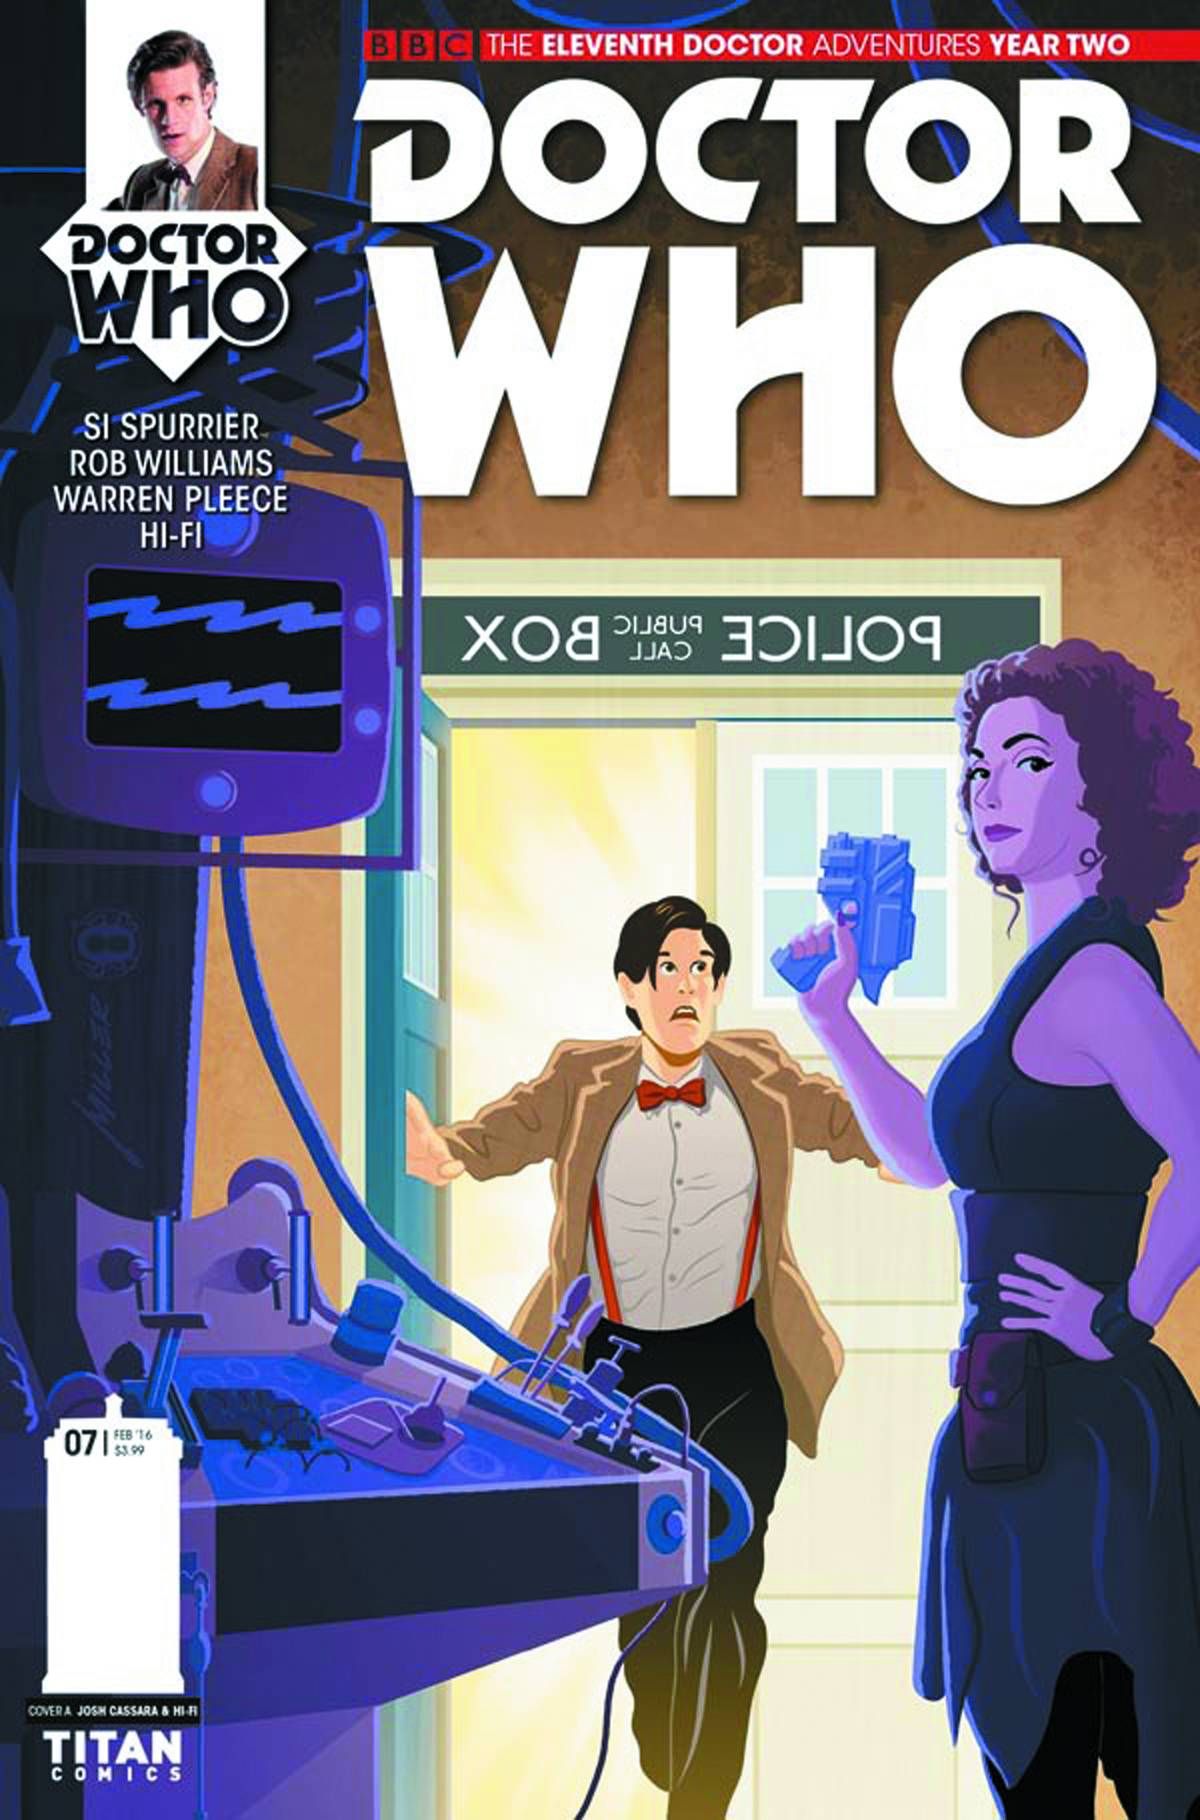 Doctor Who: 11th Doctor - Year Two #7 Comic